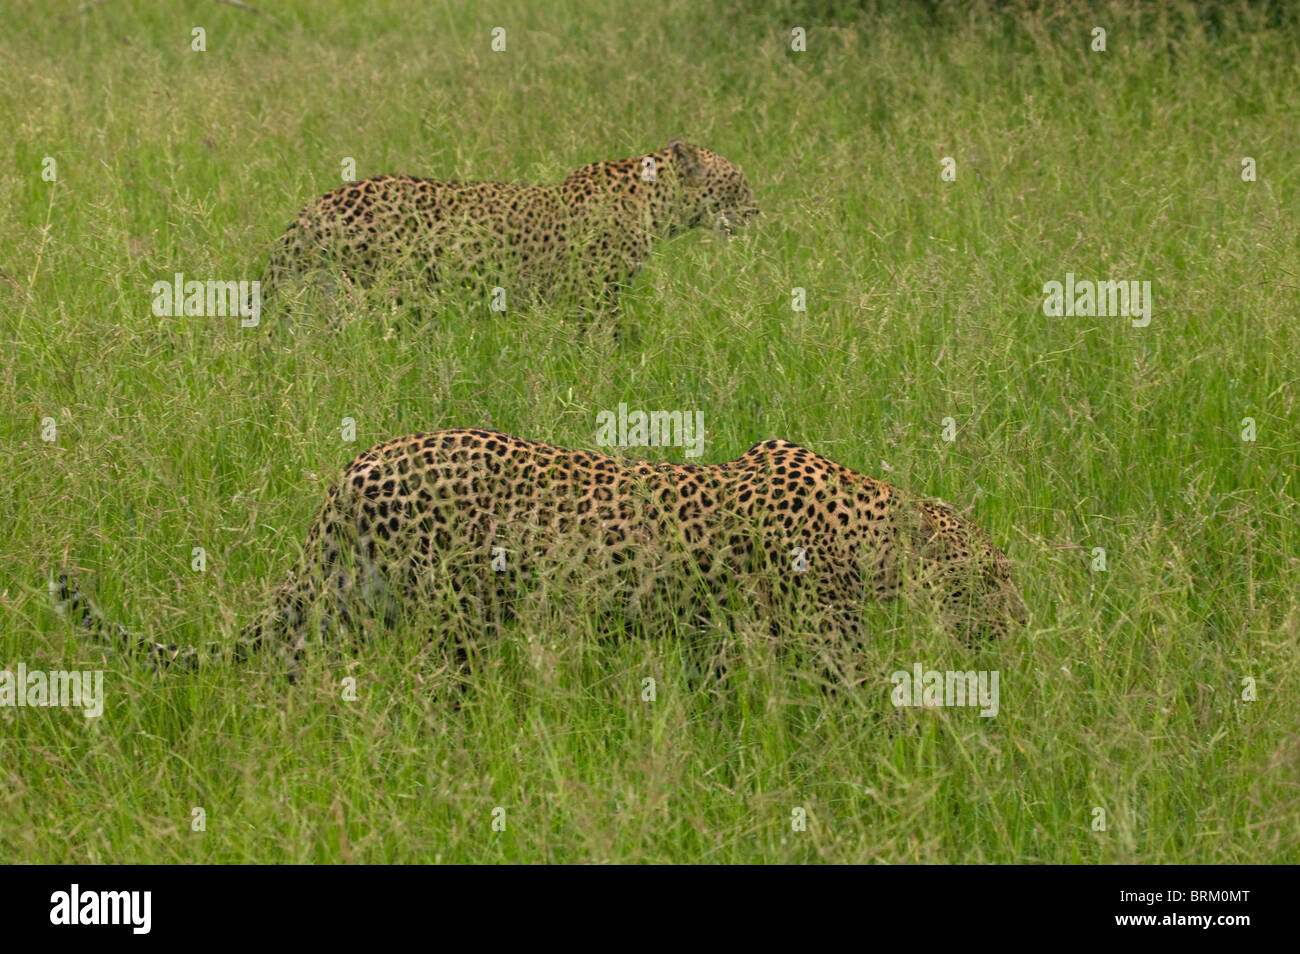 Two leopards camouflaged in lush green grass Stock Photo